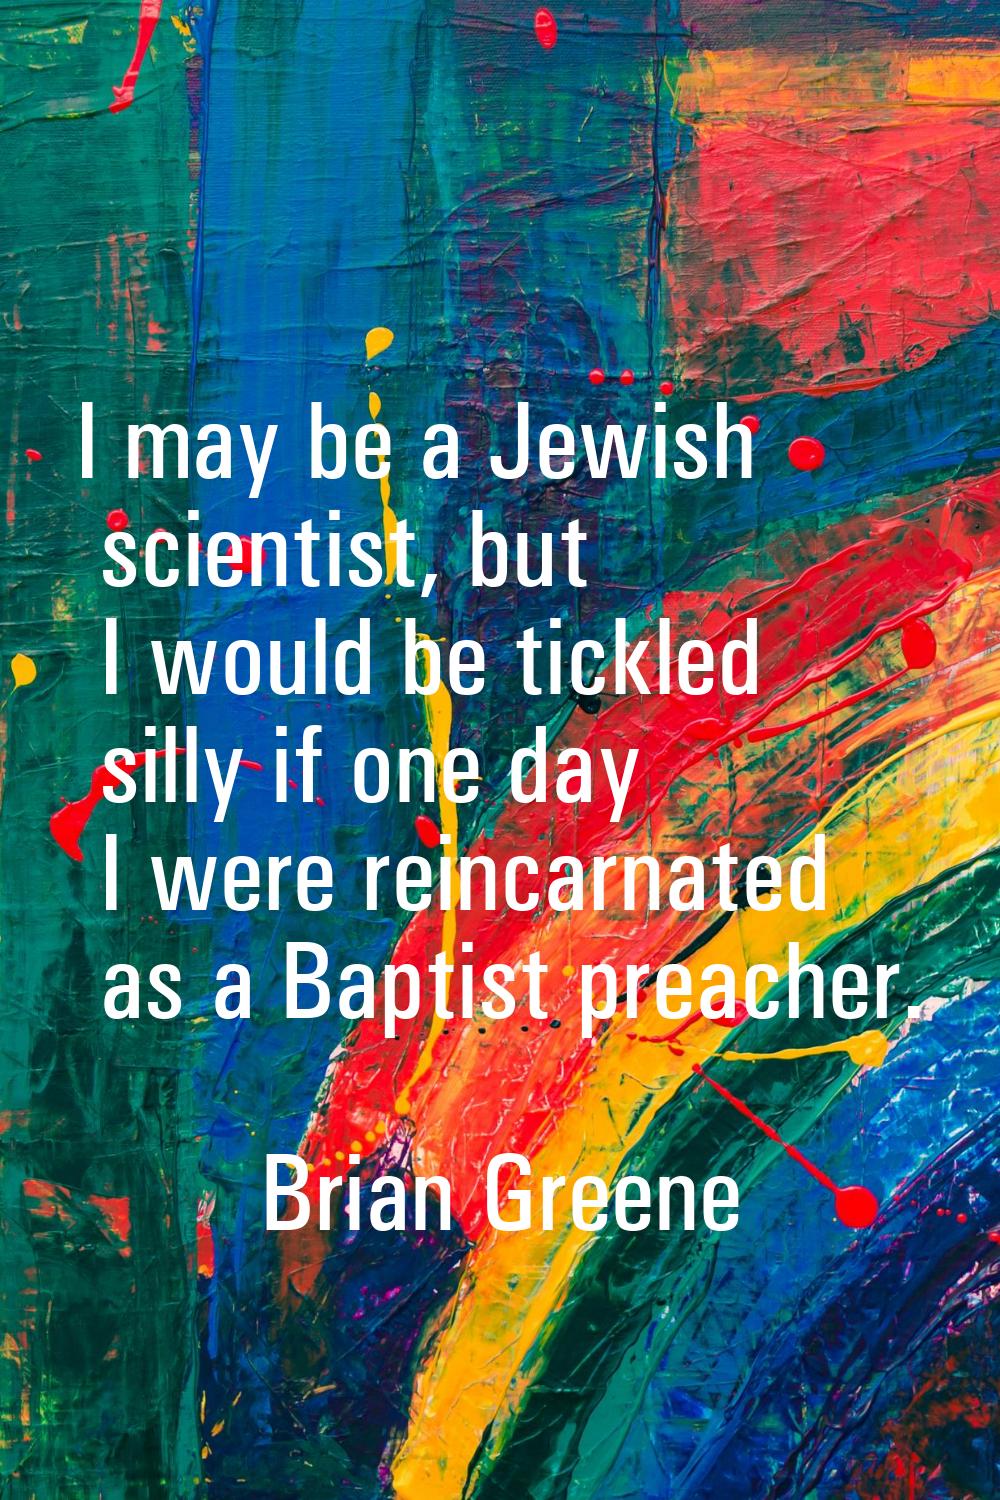 I may be a Jewish scientist, but I would be tickled silly if one day I were reincarnated as a Bapti